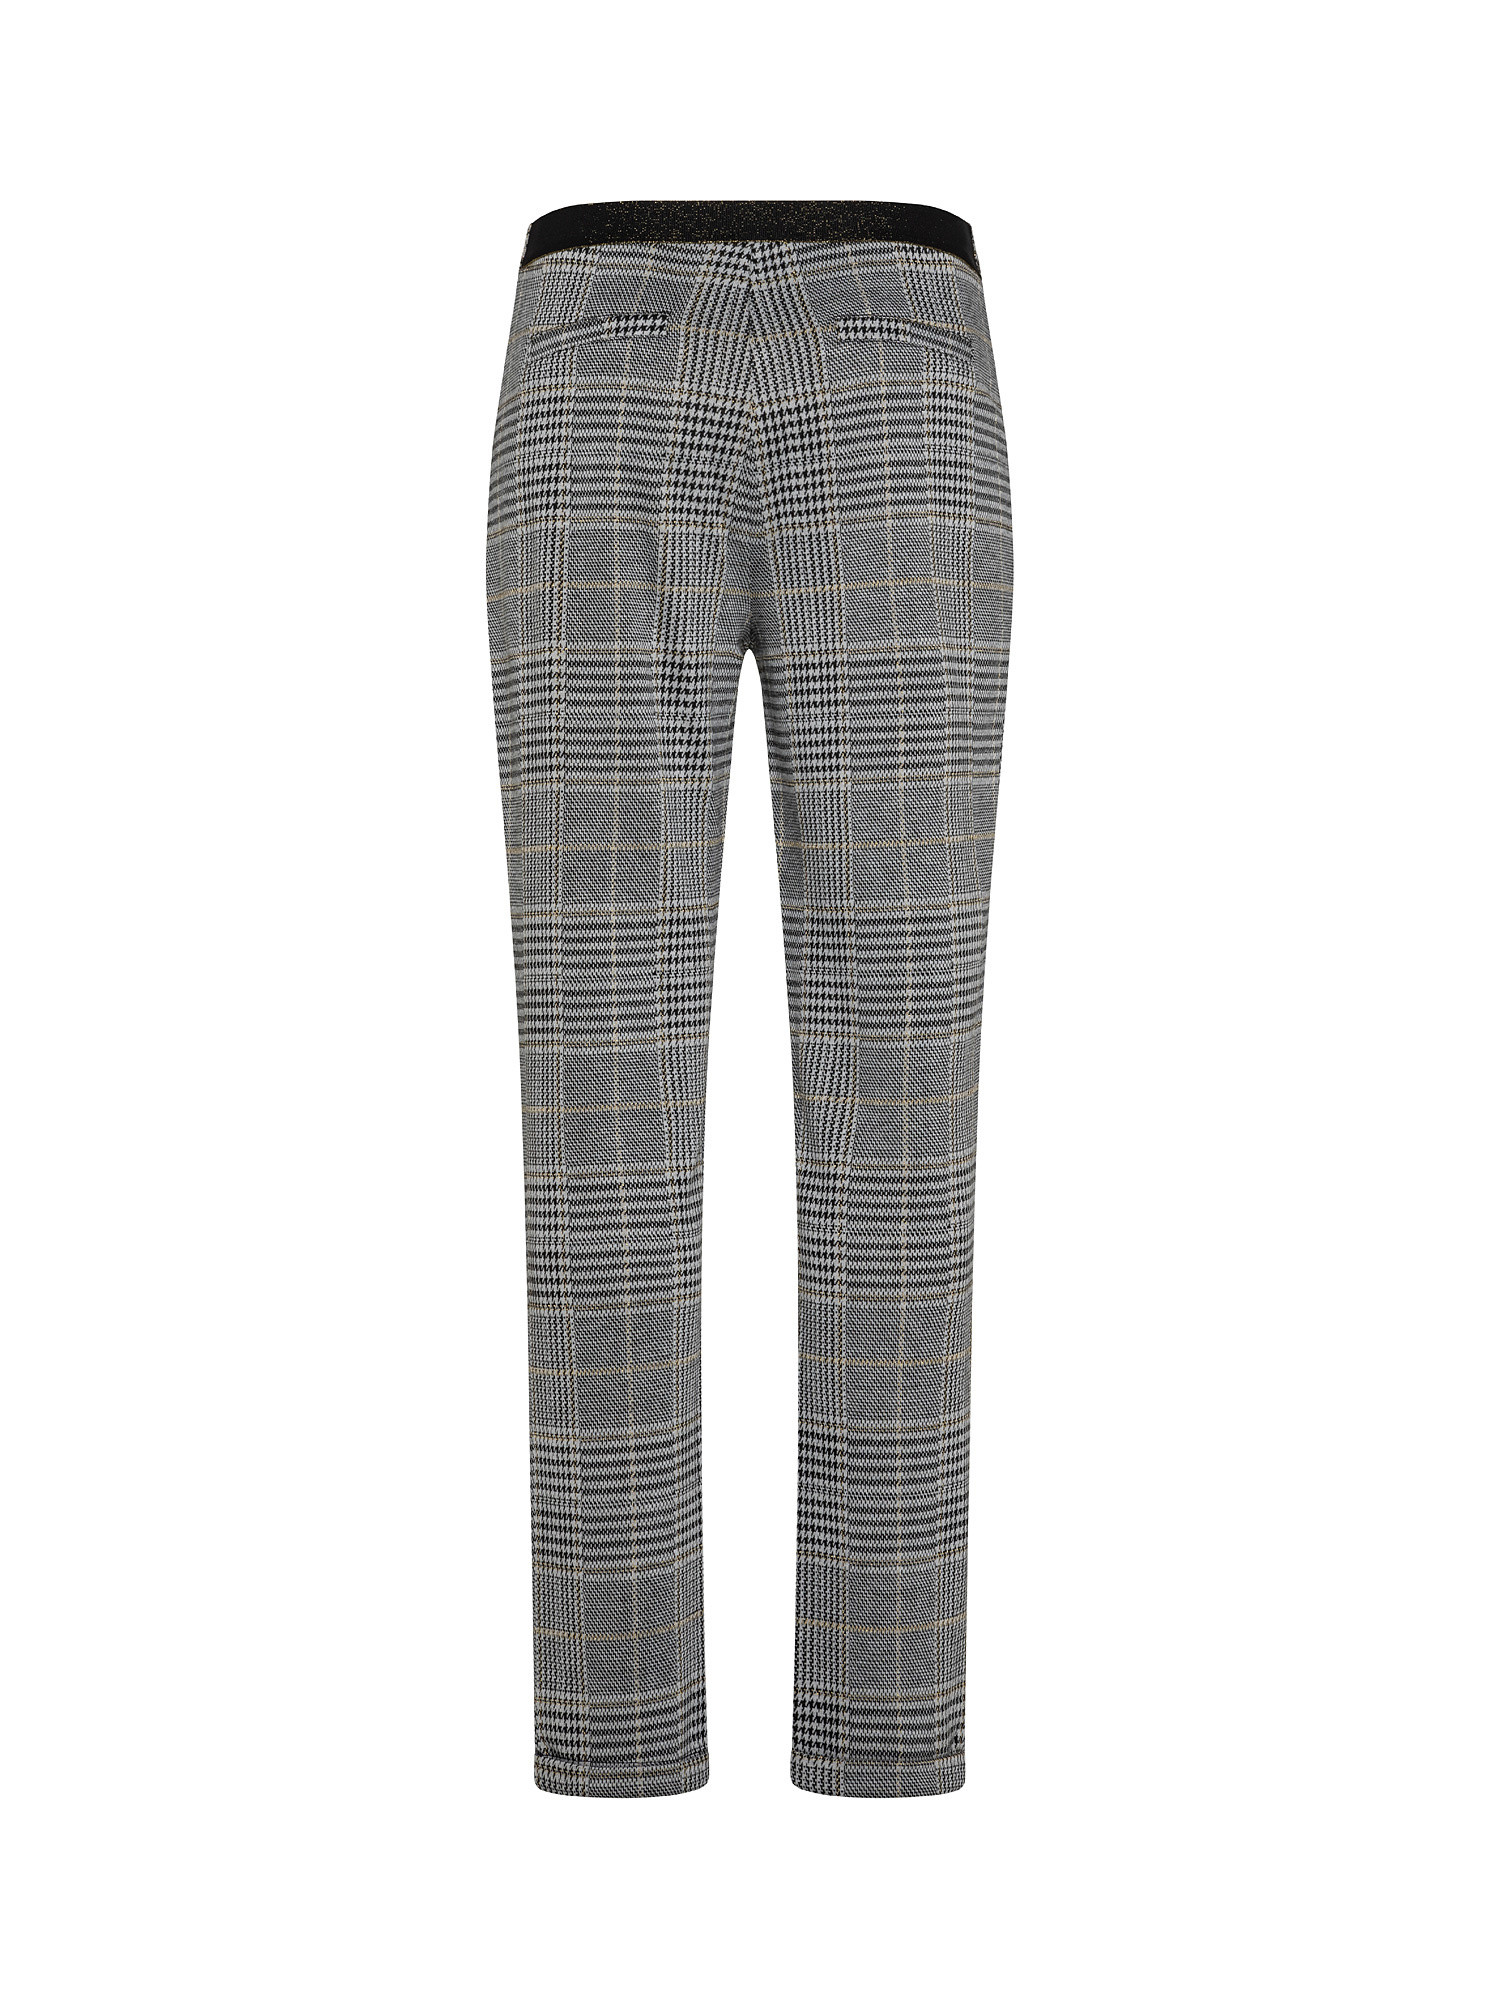 Trousers with lurex fabric, Grey, large image number 1